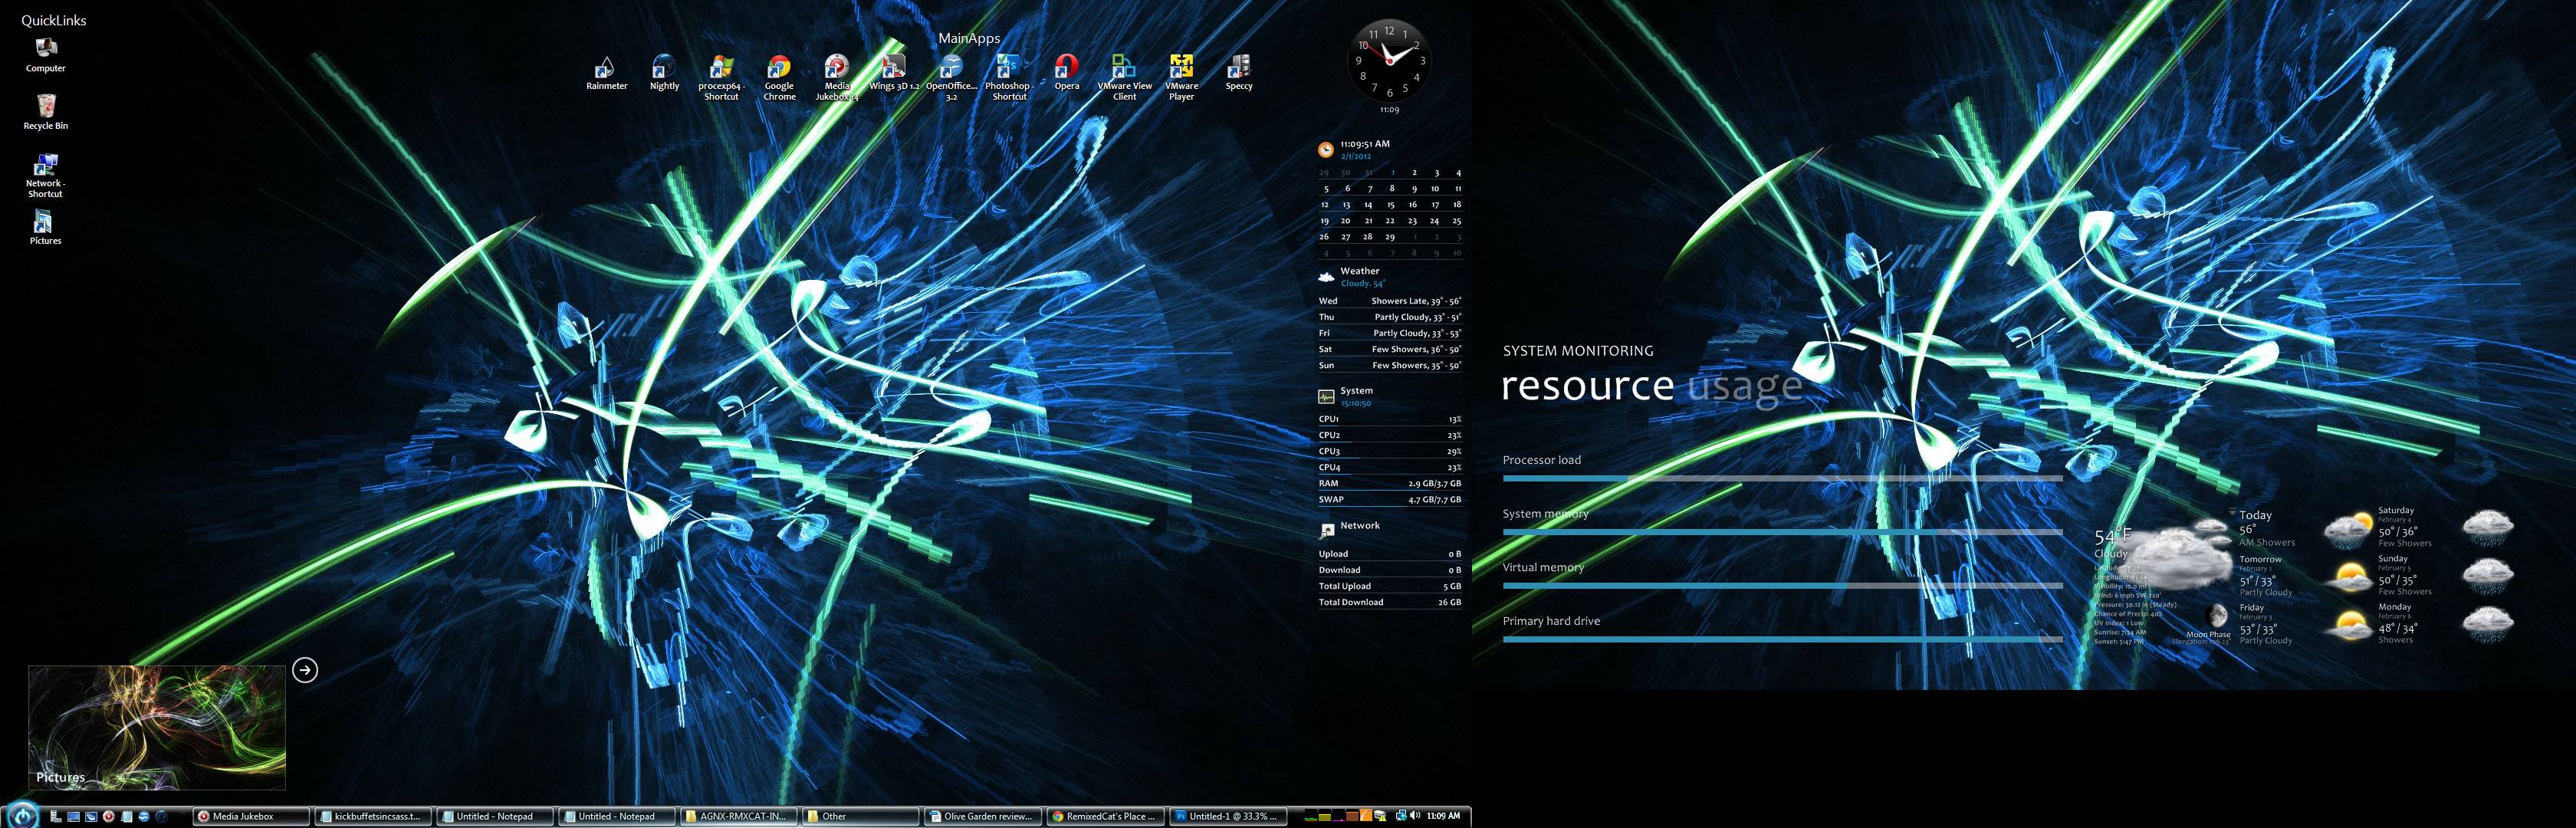 February Desktops General Discussion Neowin Forums